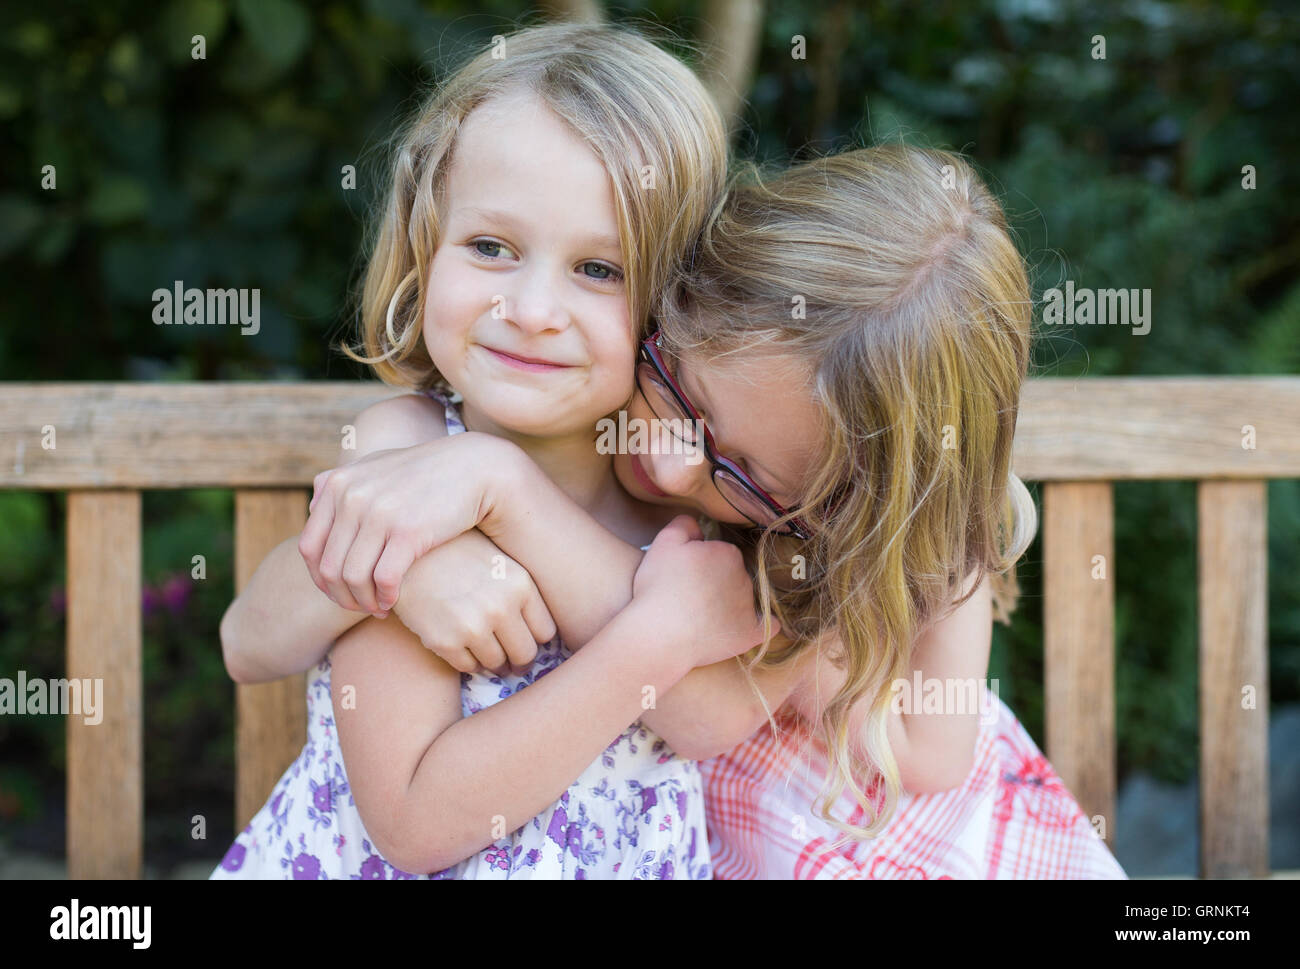 sisters cuddling and happy Stock Photo